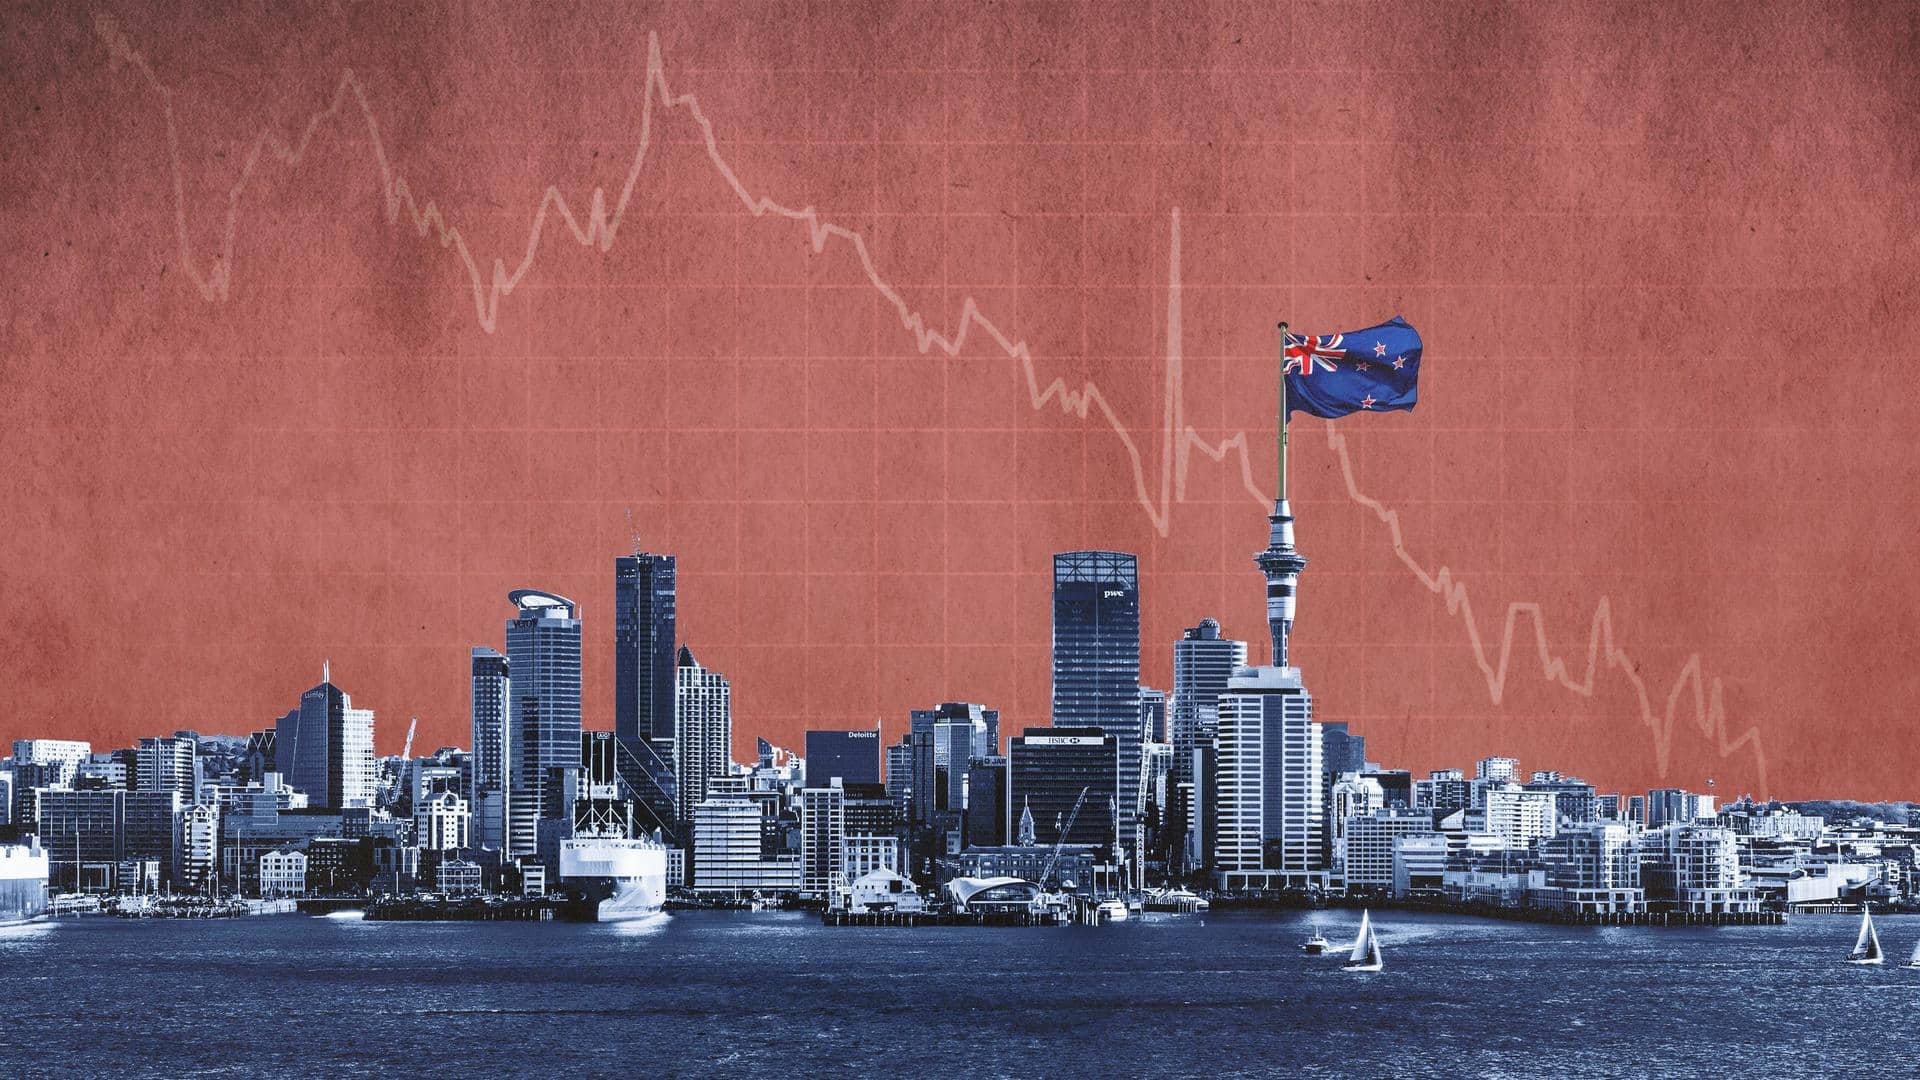 New Zealand slips into recession, currency drops